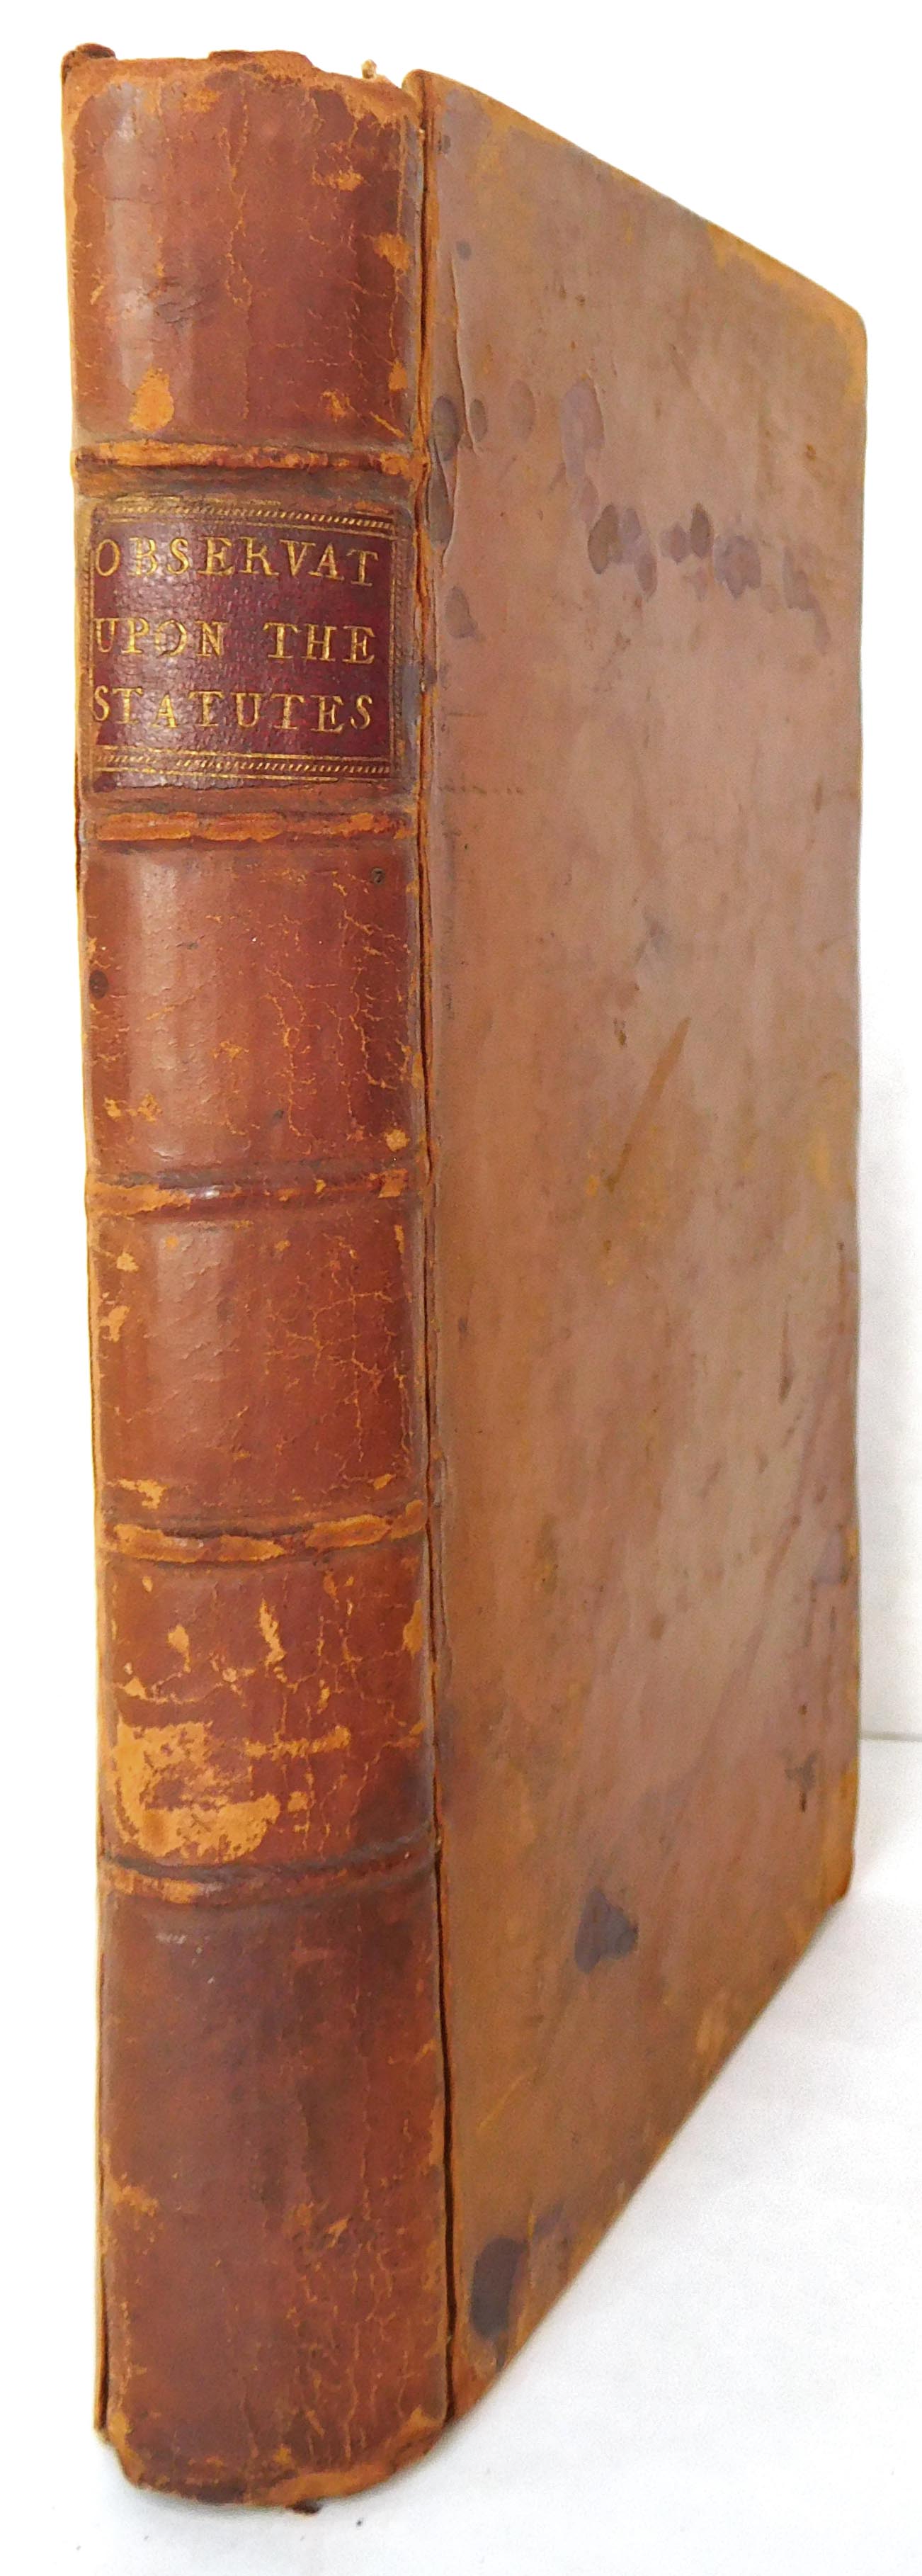 Barrington, Daines - Observations on the Statutes, Chiefly the More Ancient, From Magna Charta to The Twenty-first of James the First, Ch. xxvii, With an Appendix, Being A Proposal for new modelling the Statutes. Second Edition, With Corrections and Additions